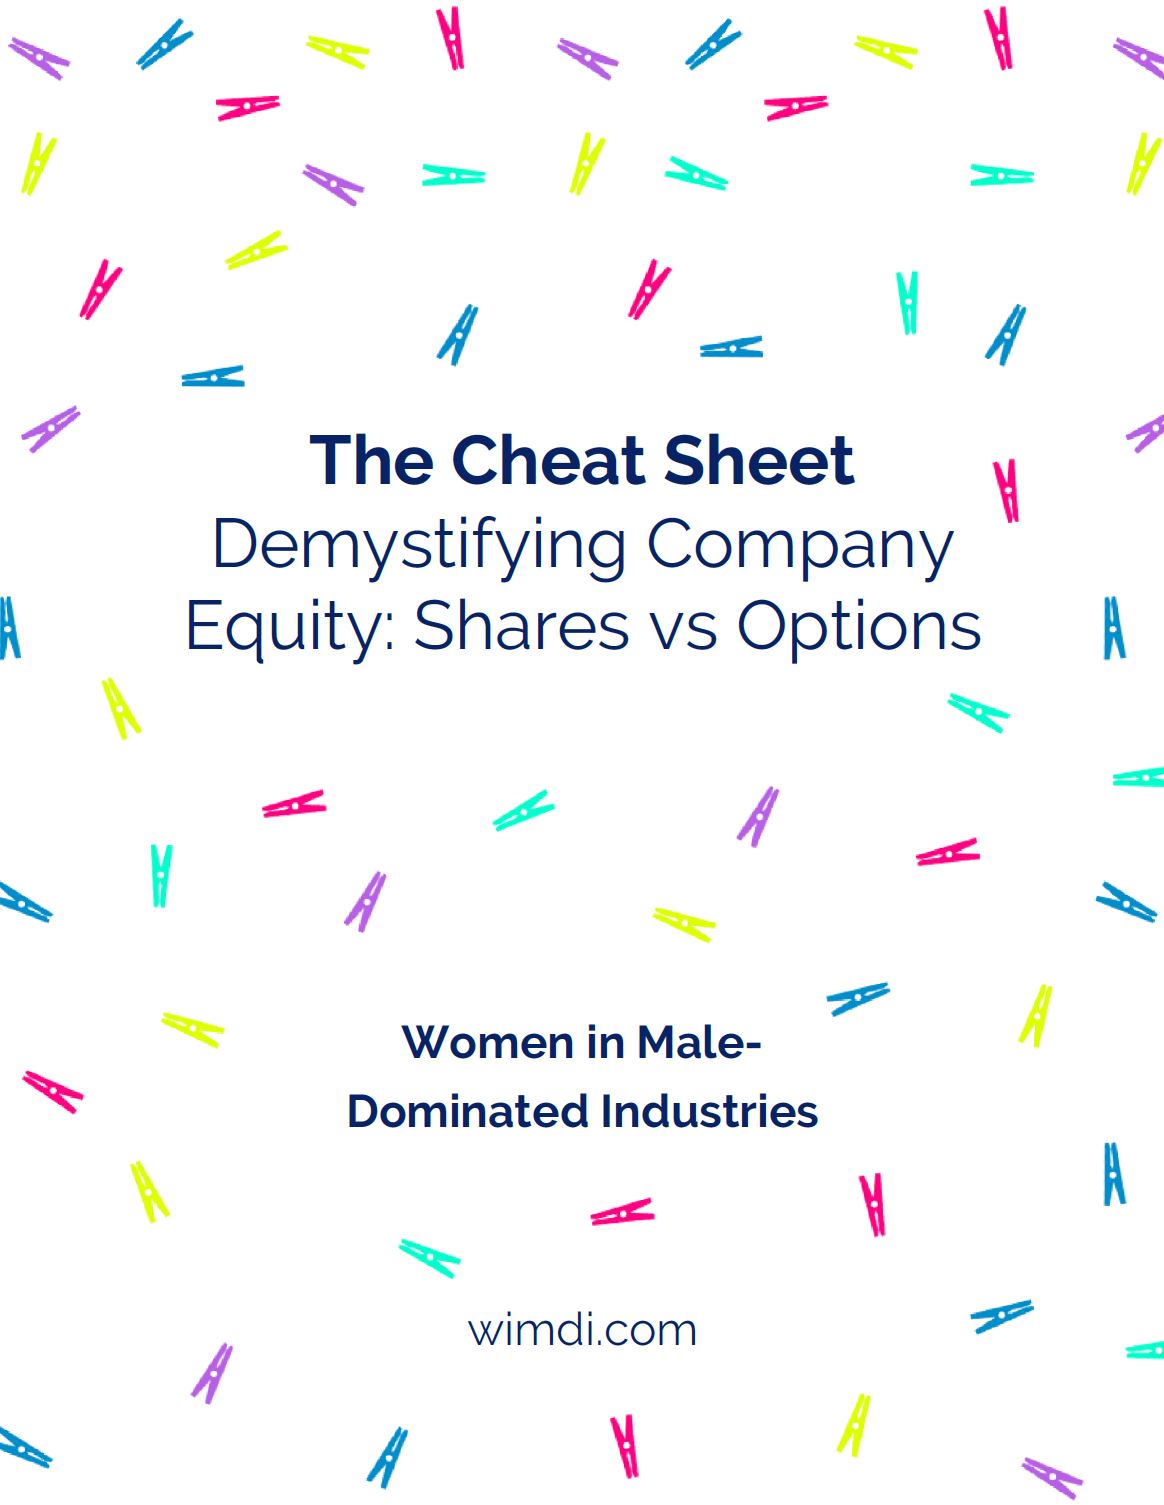 The Cheat Sheet: Demystifying Company Equity - Shares vs Options